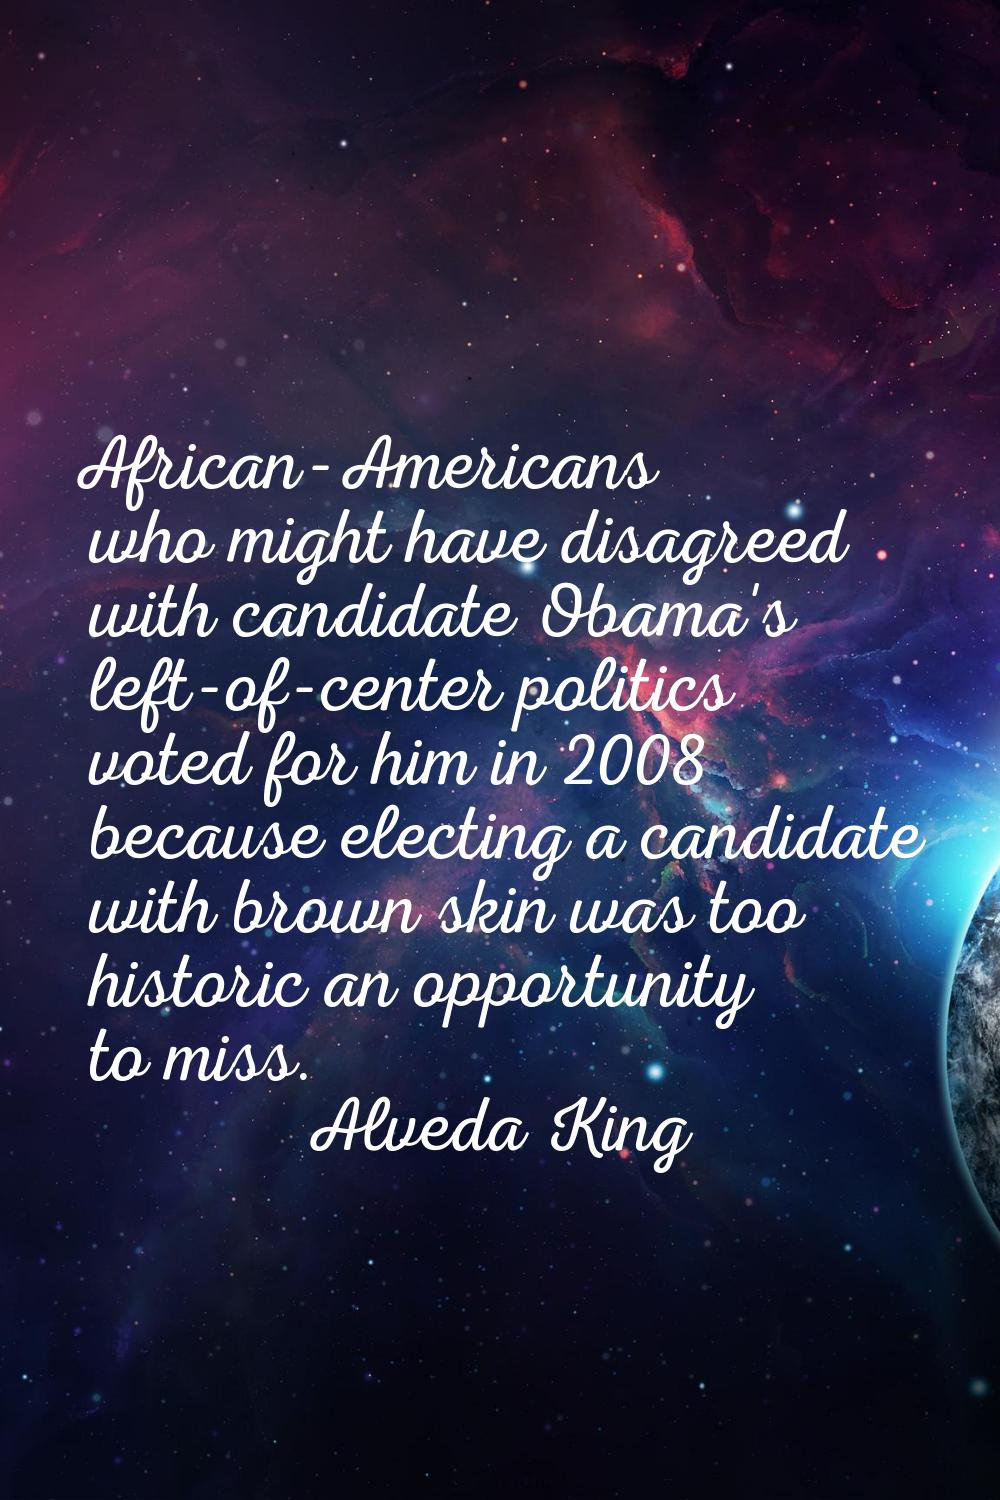 African-Americans who might have disagreed with candidate Obama's left-of-center politics voted for